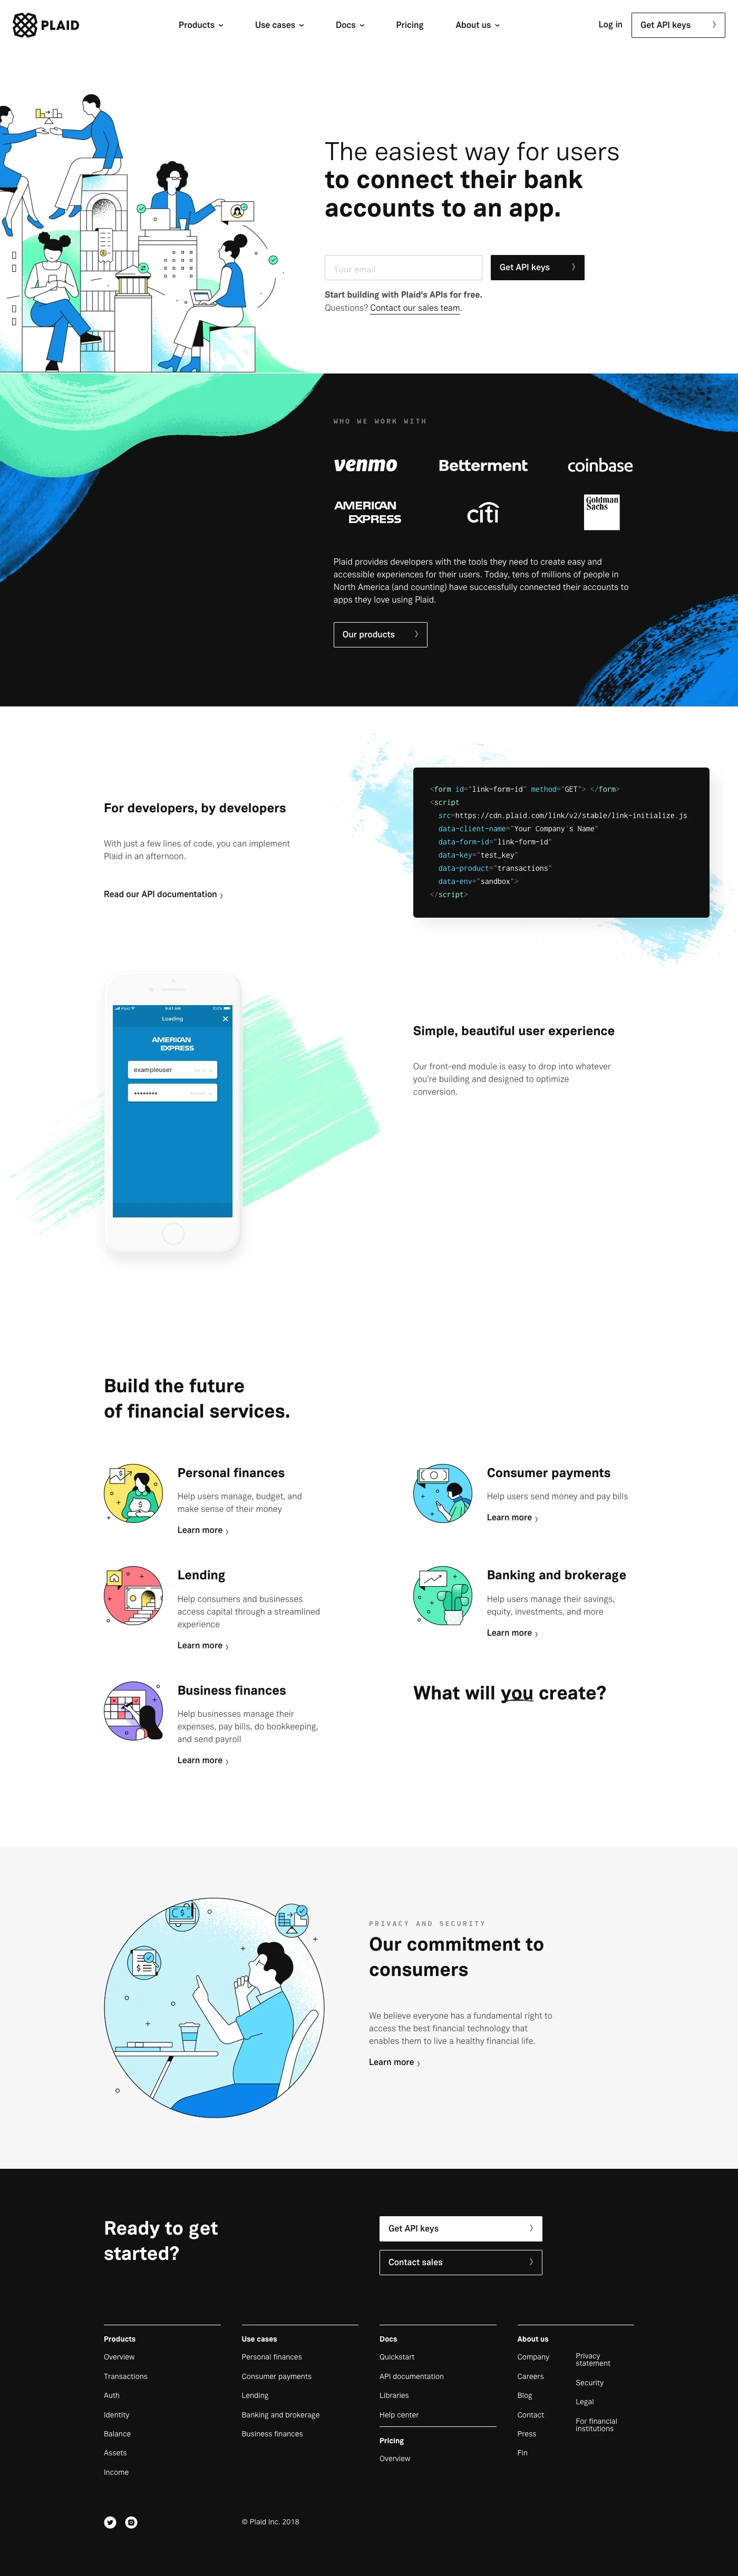 Plaid Landing Page Example: Develop the future of fintech with Plaid, the technology layer for financial services. Plaid enables applications to connect with users’ bank accounts.